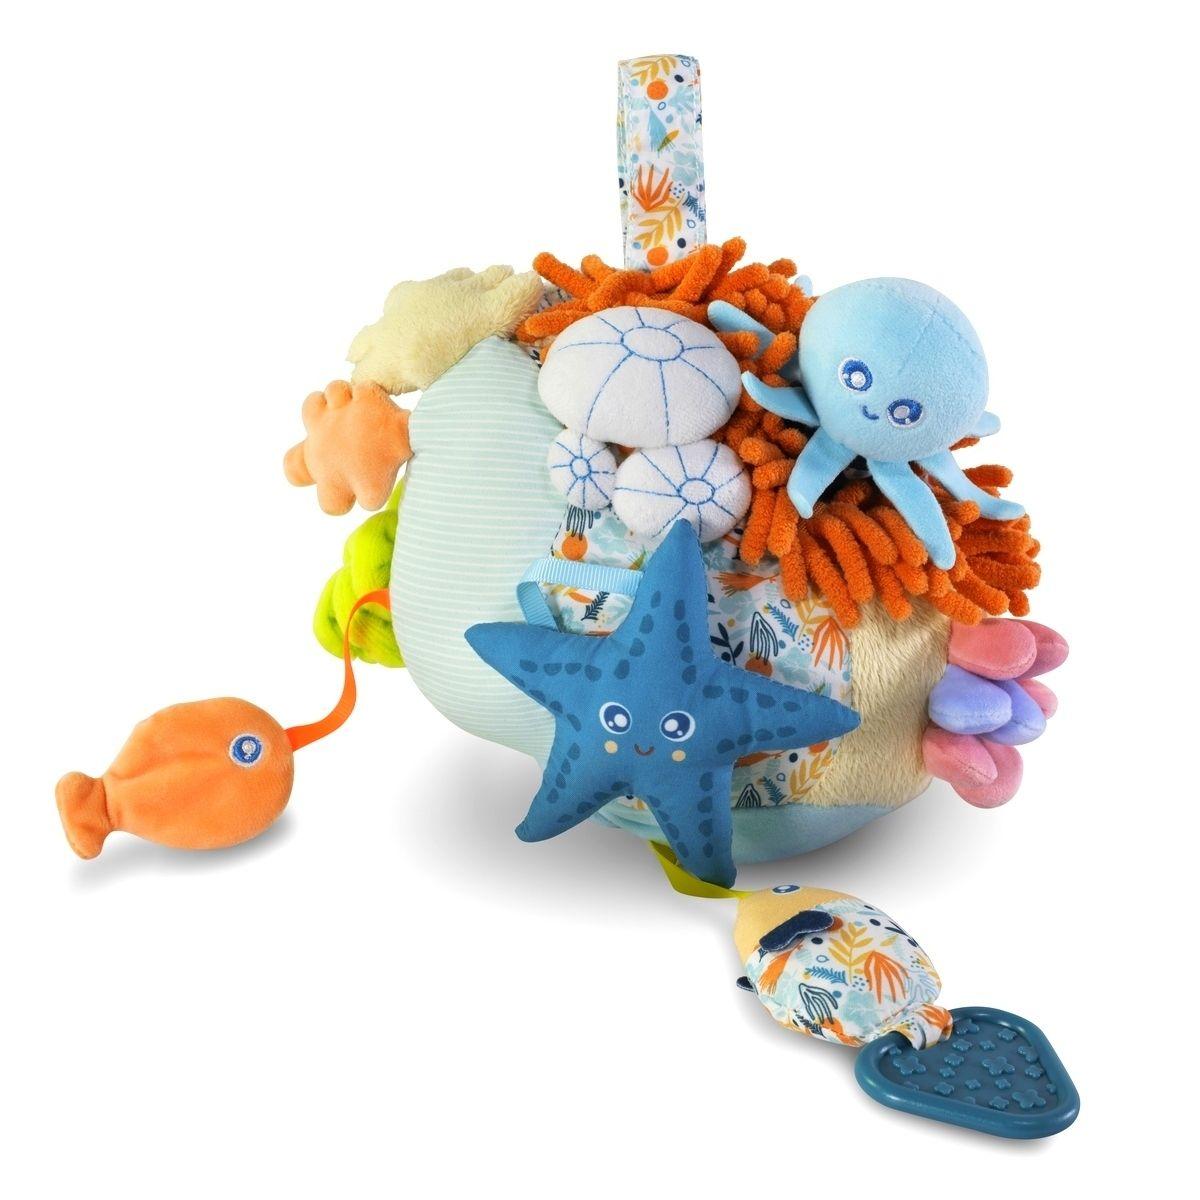 Sensory toy - coral reef